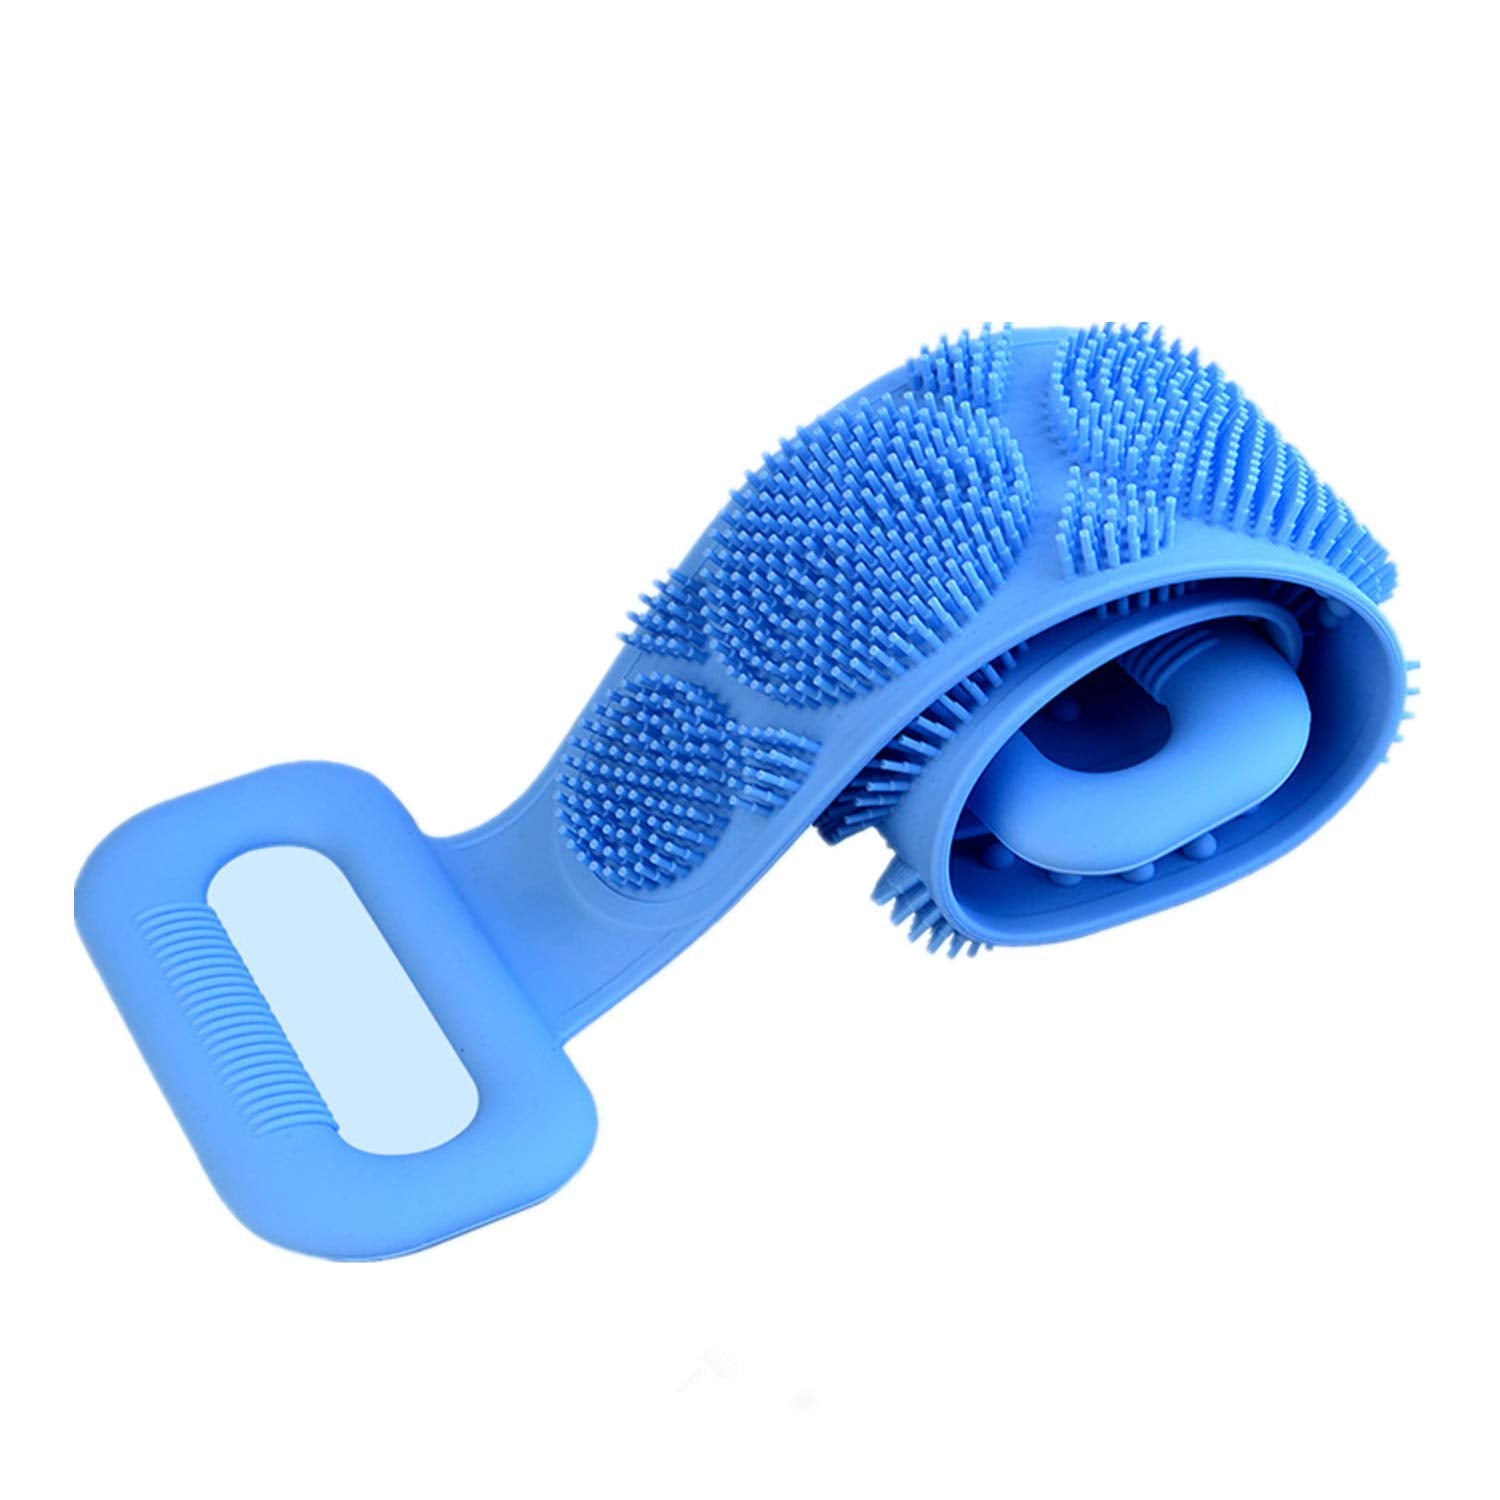 1302 Silicone Body Back Scrubber Double Side Bathing Brush for Skin Deep Cleaning, Scrubber Belt - China, 0.22 kgs